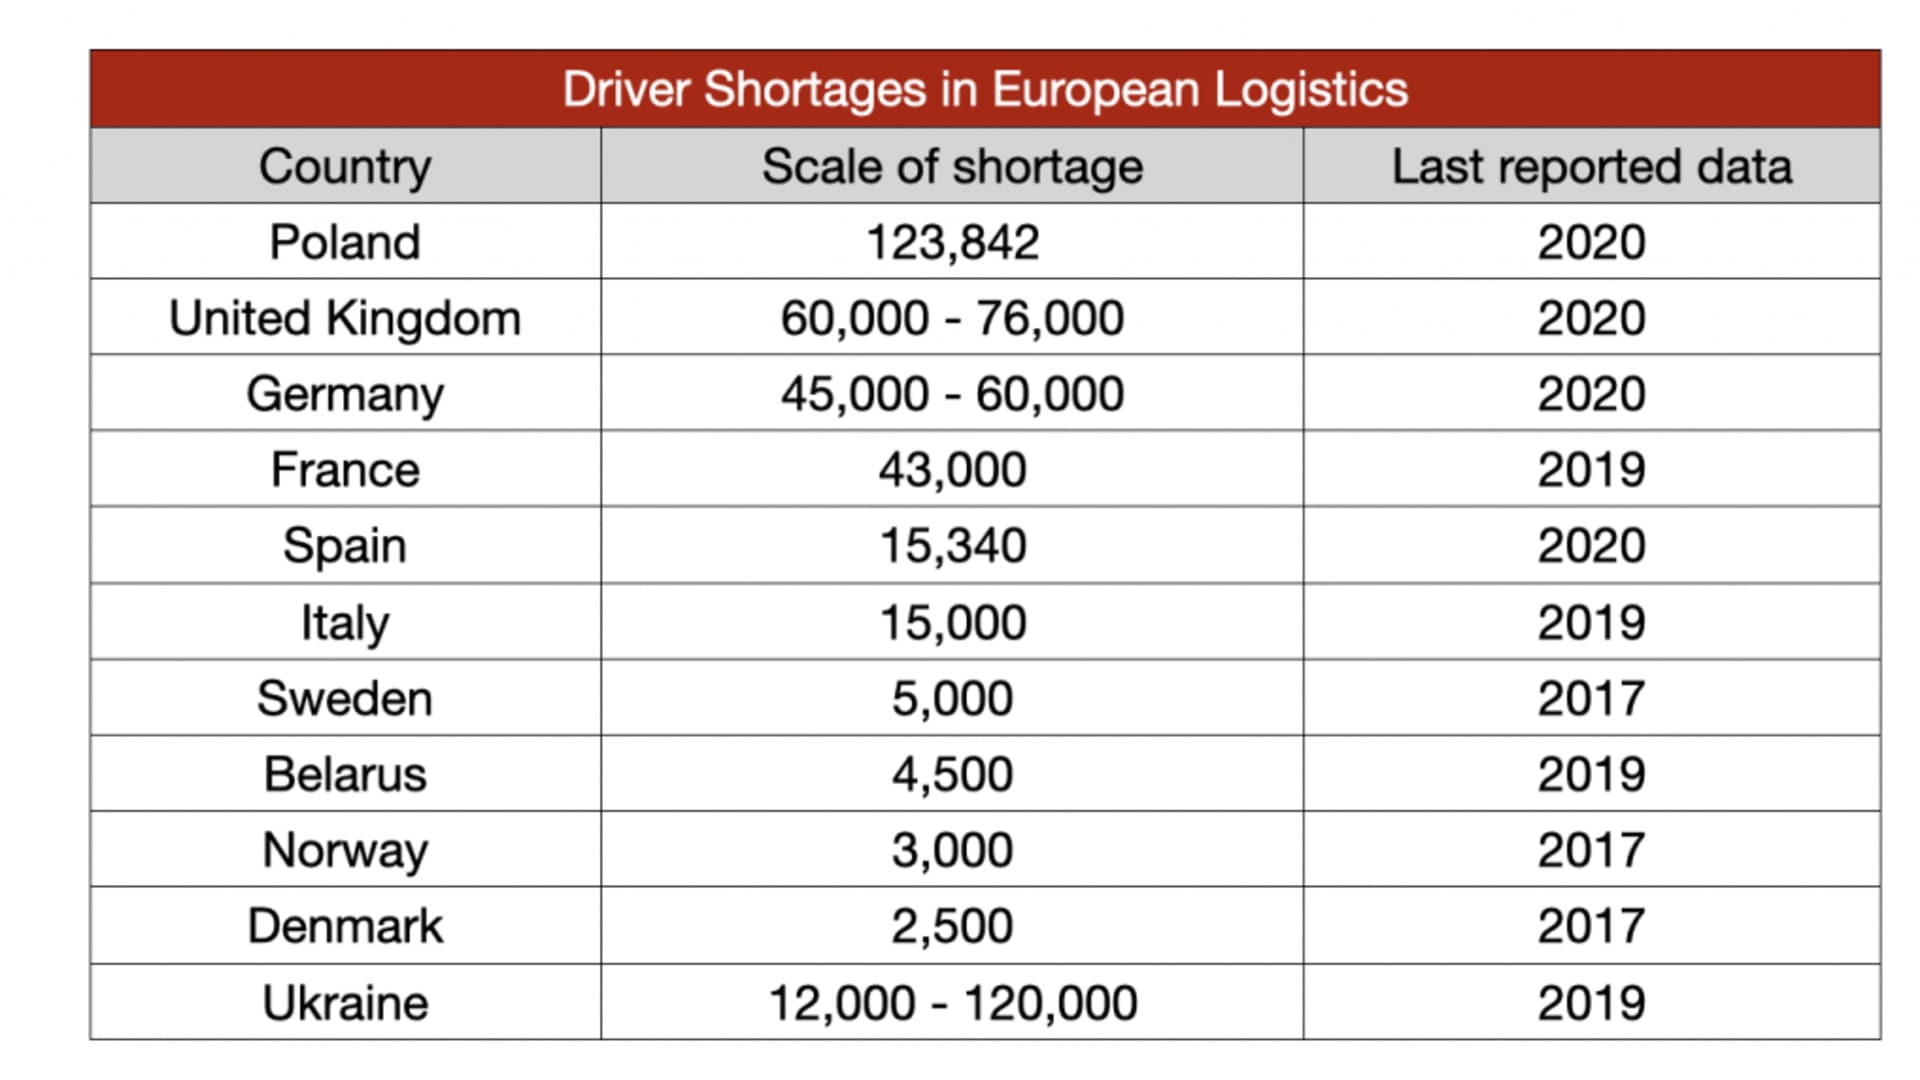 Transport Intelligence's research looked at driver shortages across Europe